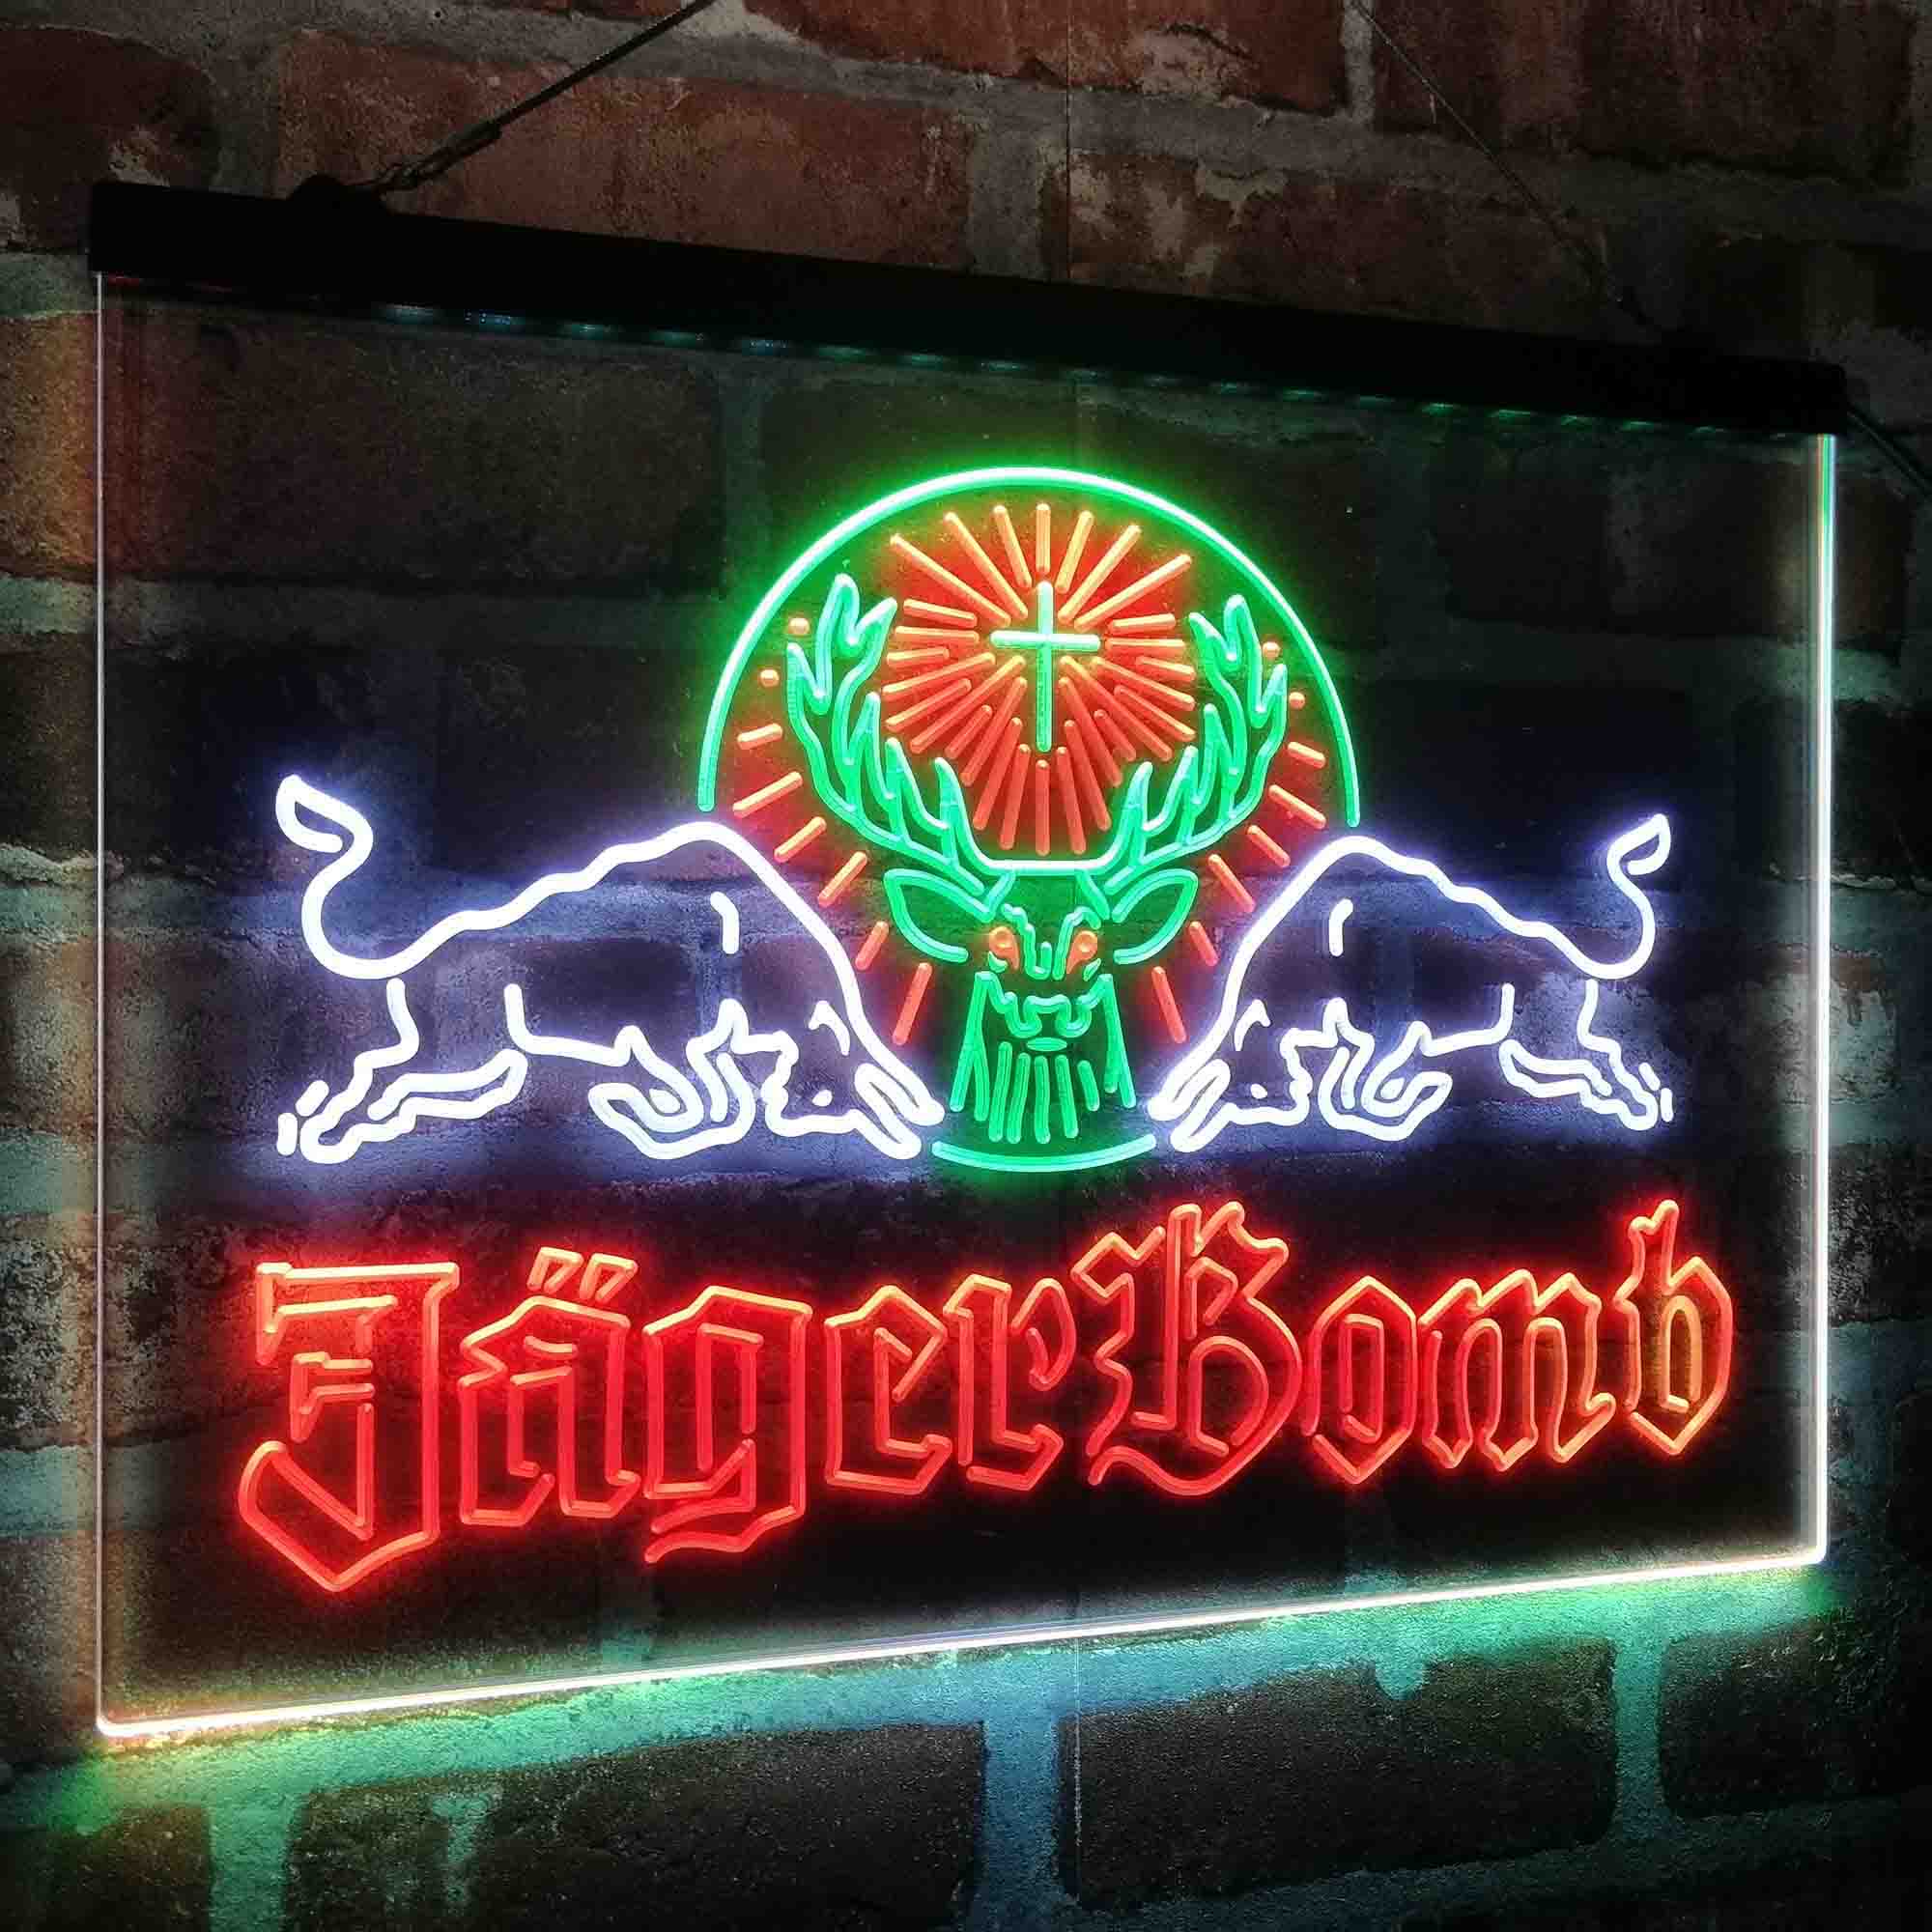 JaGerbomb Bull Shot Neon LED Sign - Newest 3 Colors